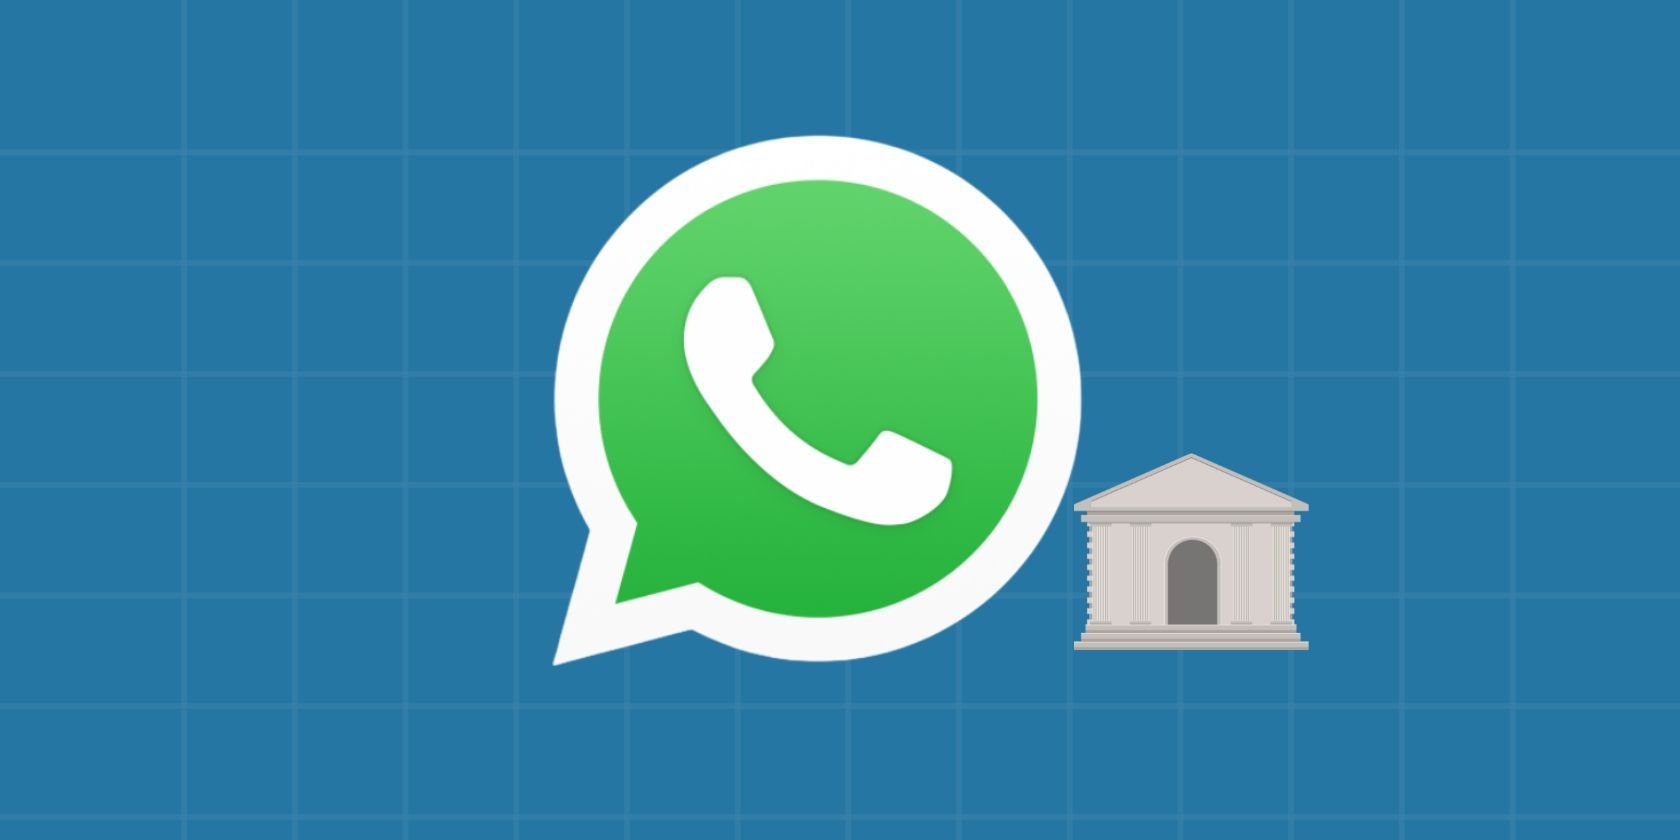 Why No Governments Should Have Access to Your WhatsApp Data